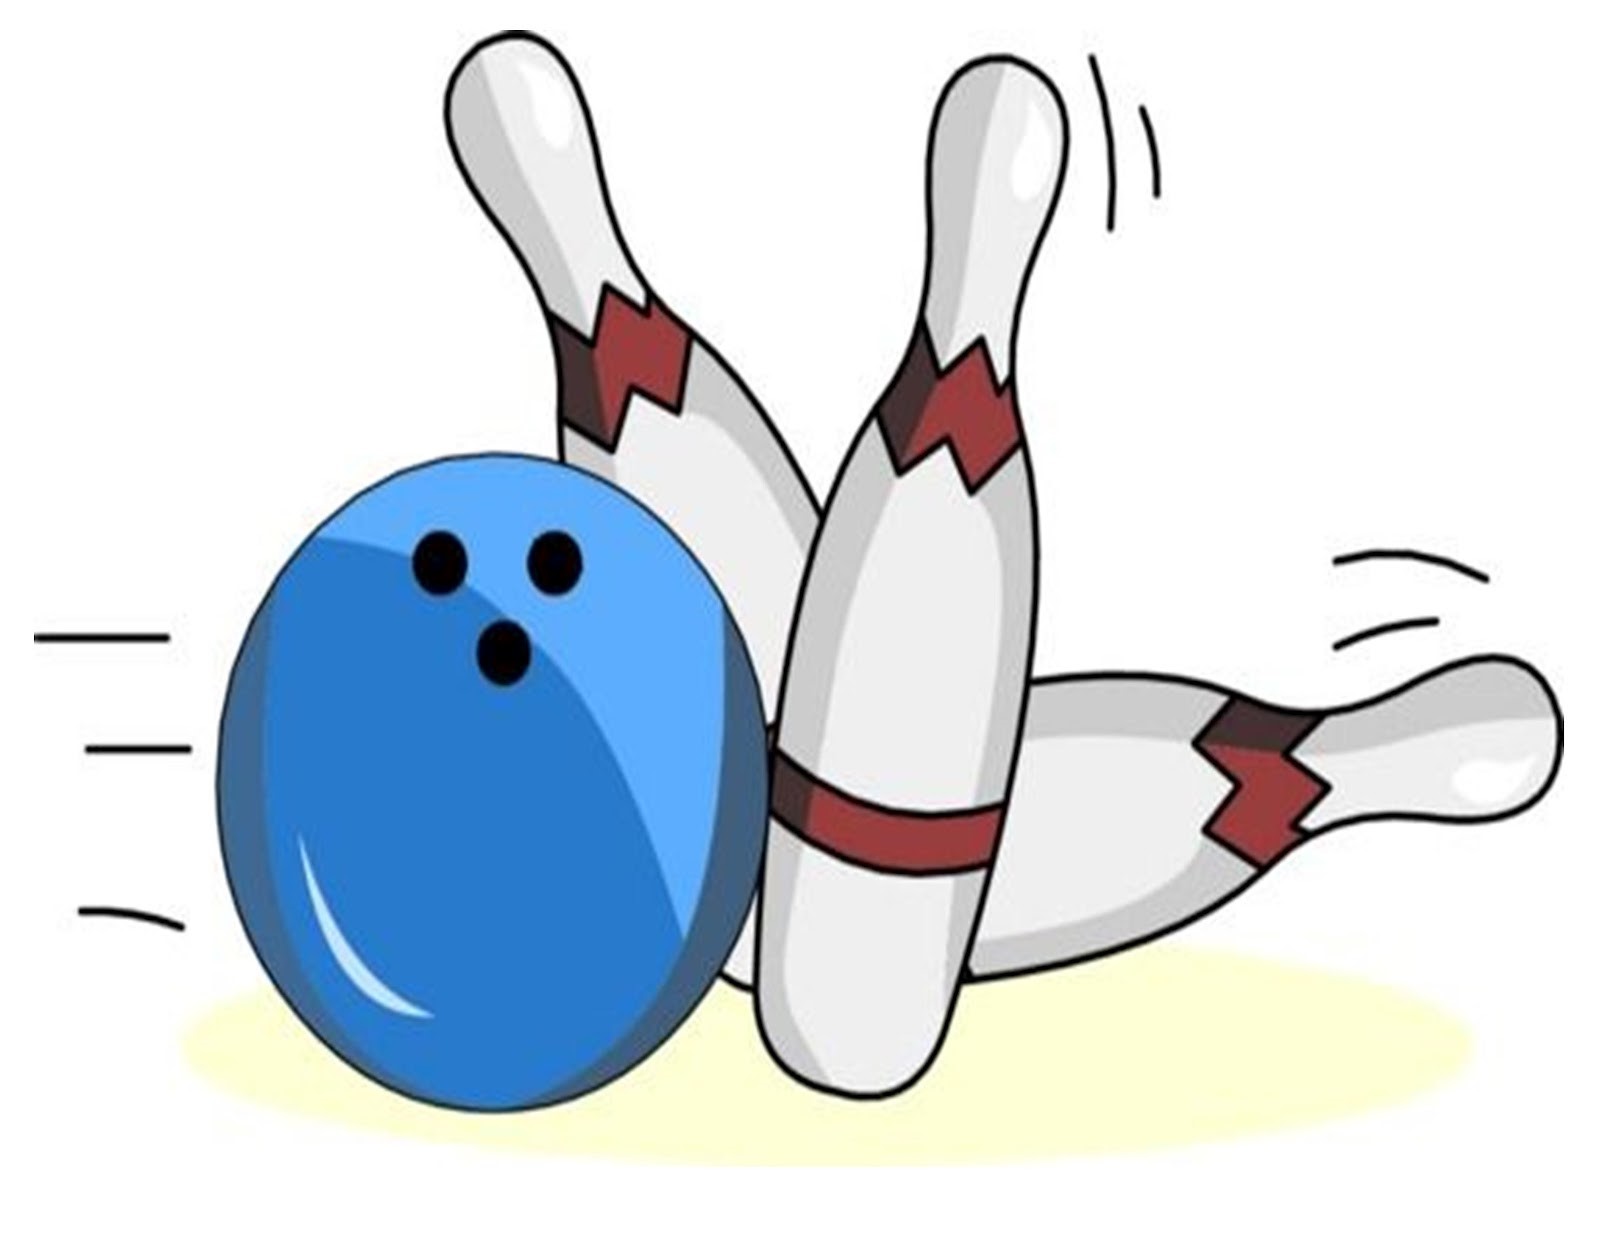 Fall events for alumni. Bowling clipart event